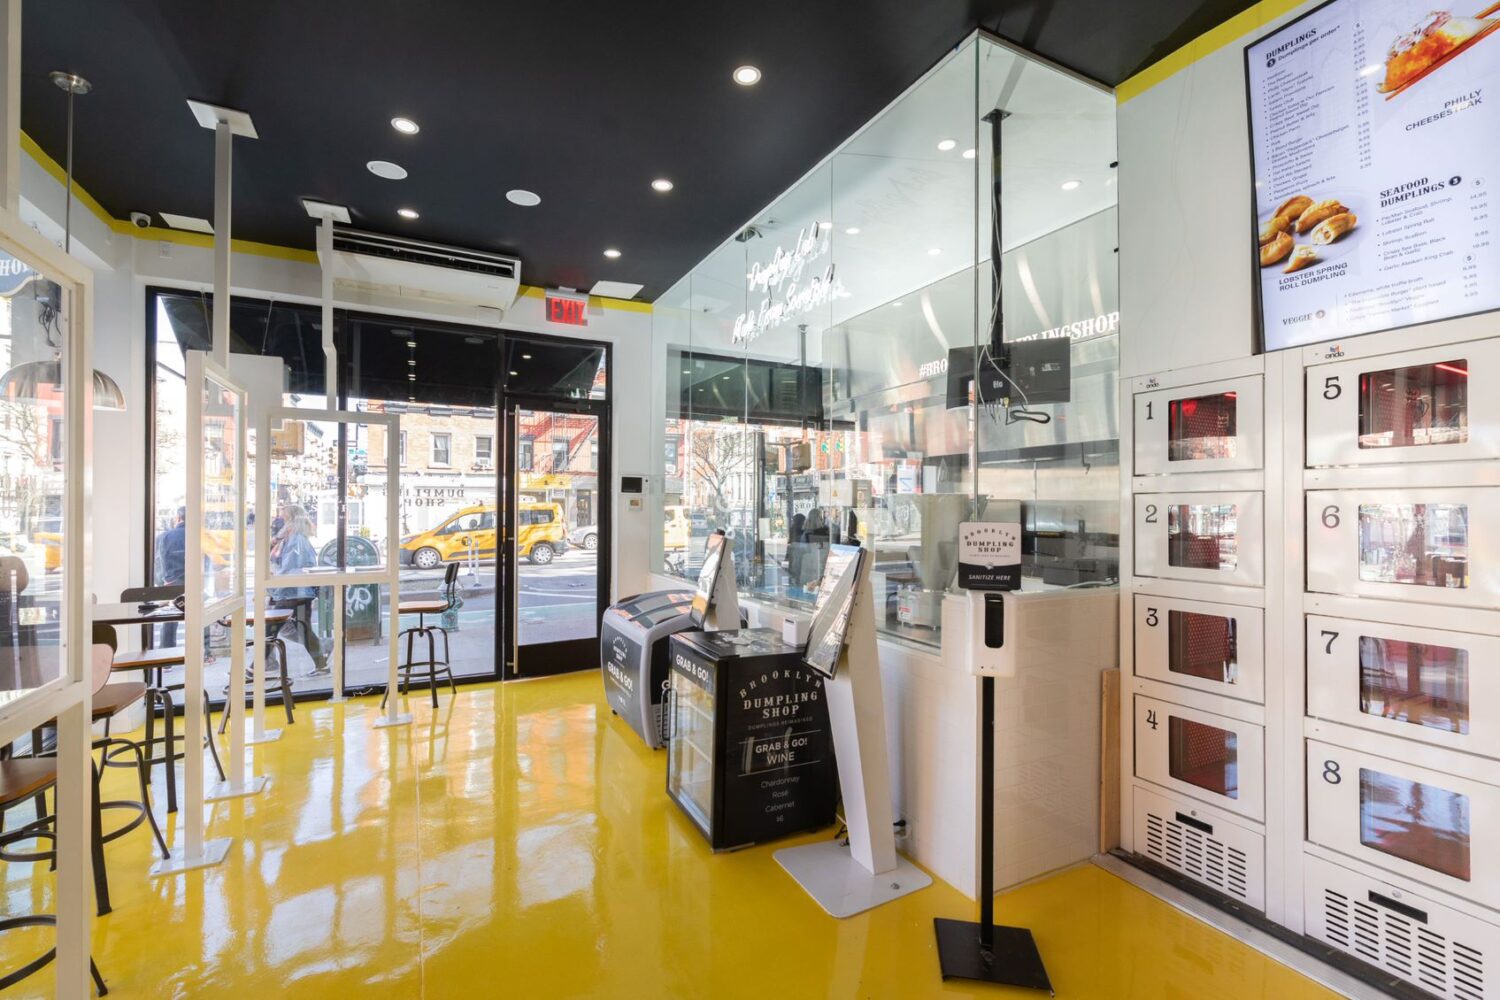 Interior image of a store with black ceiling and shiny yellow floors